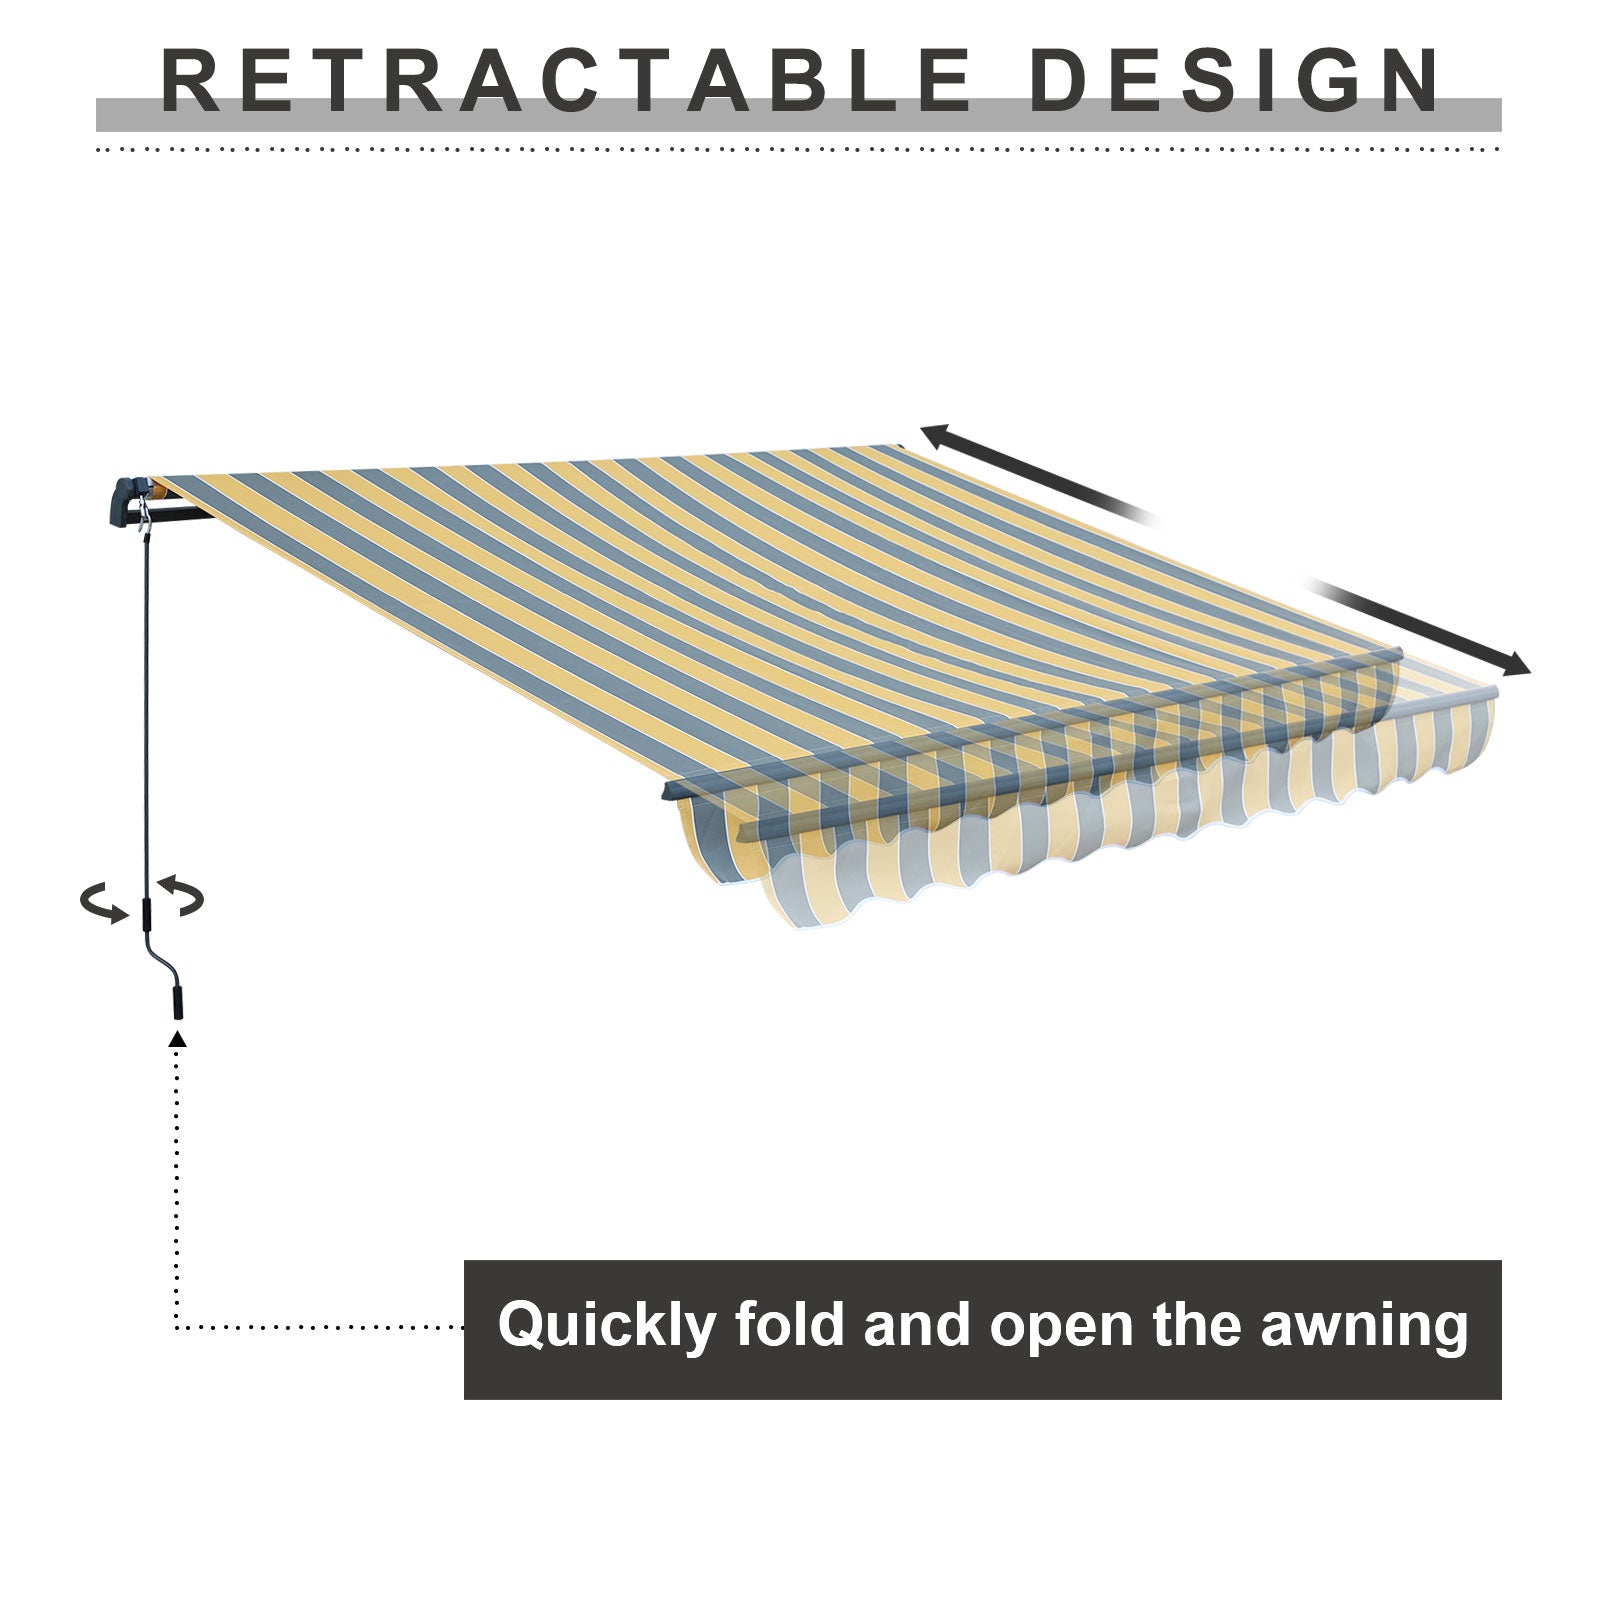 12'x  8' x 5' Retractable Window Awning Sunshade Shelter,Polyester Fabric,with Brackets and Two Wall Bases  Aoodor   